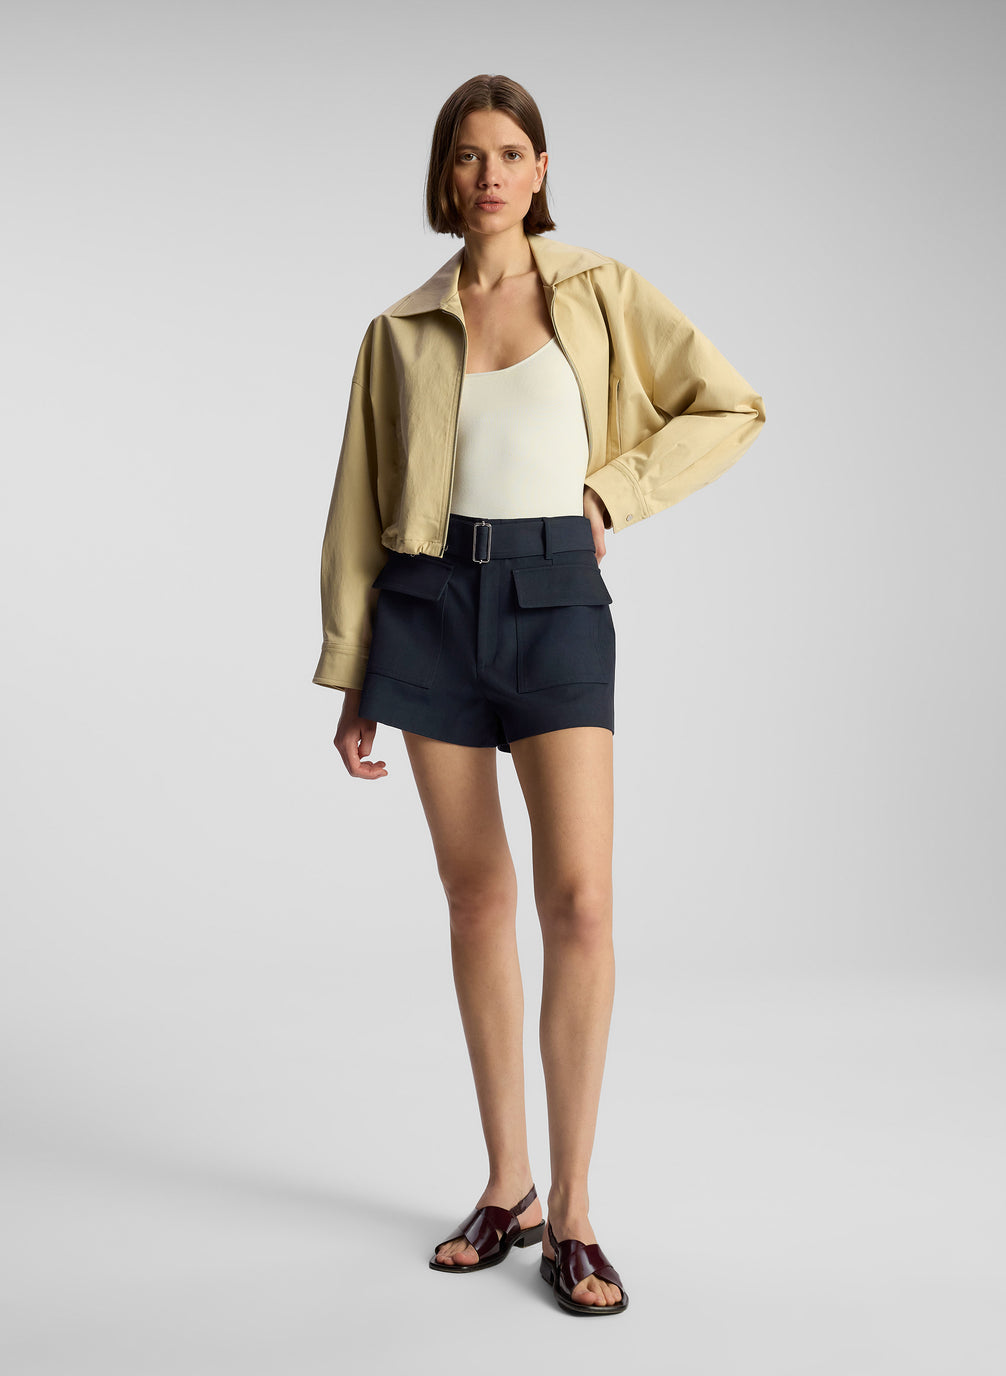 front view of woman wearing tan jacket, cream bodysuit, and navy blue shorts